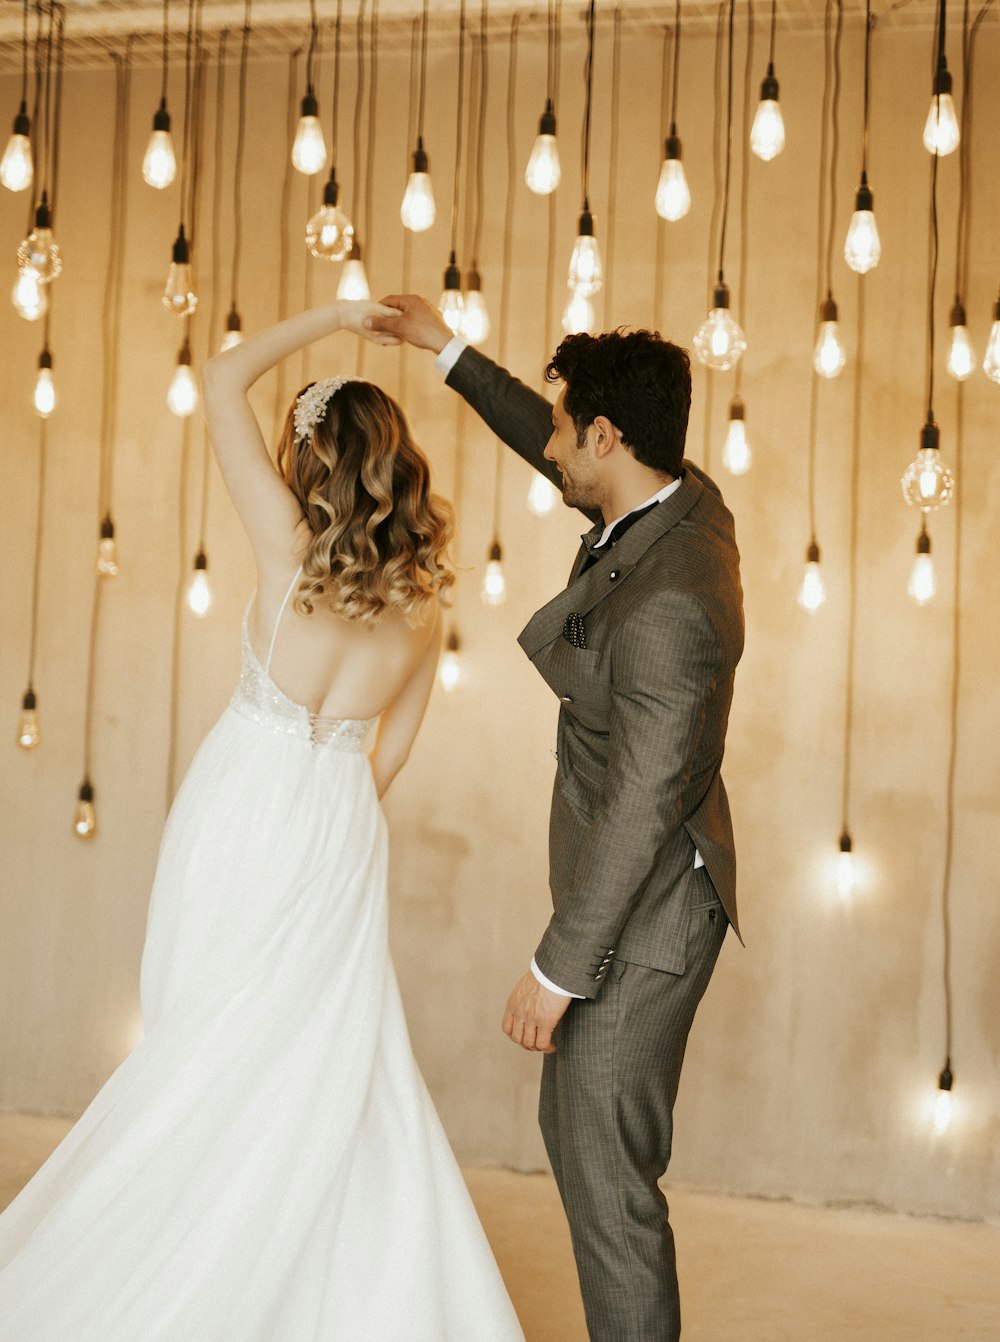 a bride and groom dancing in front of hanging lights